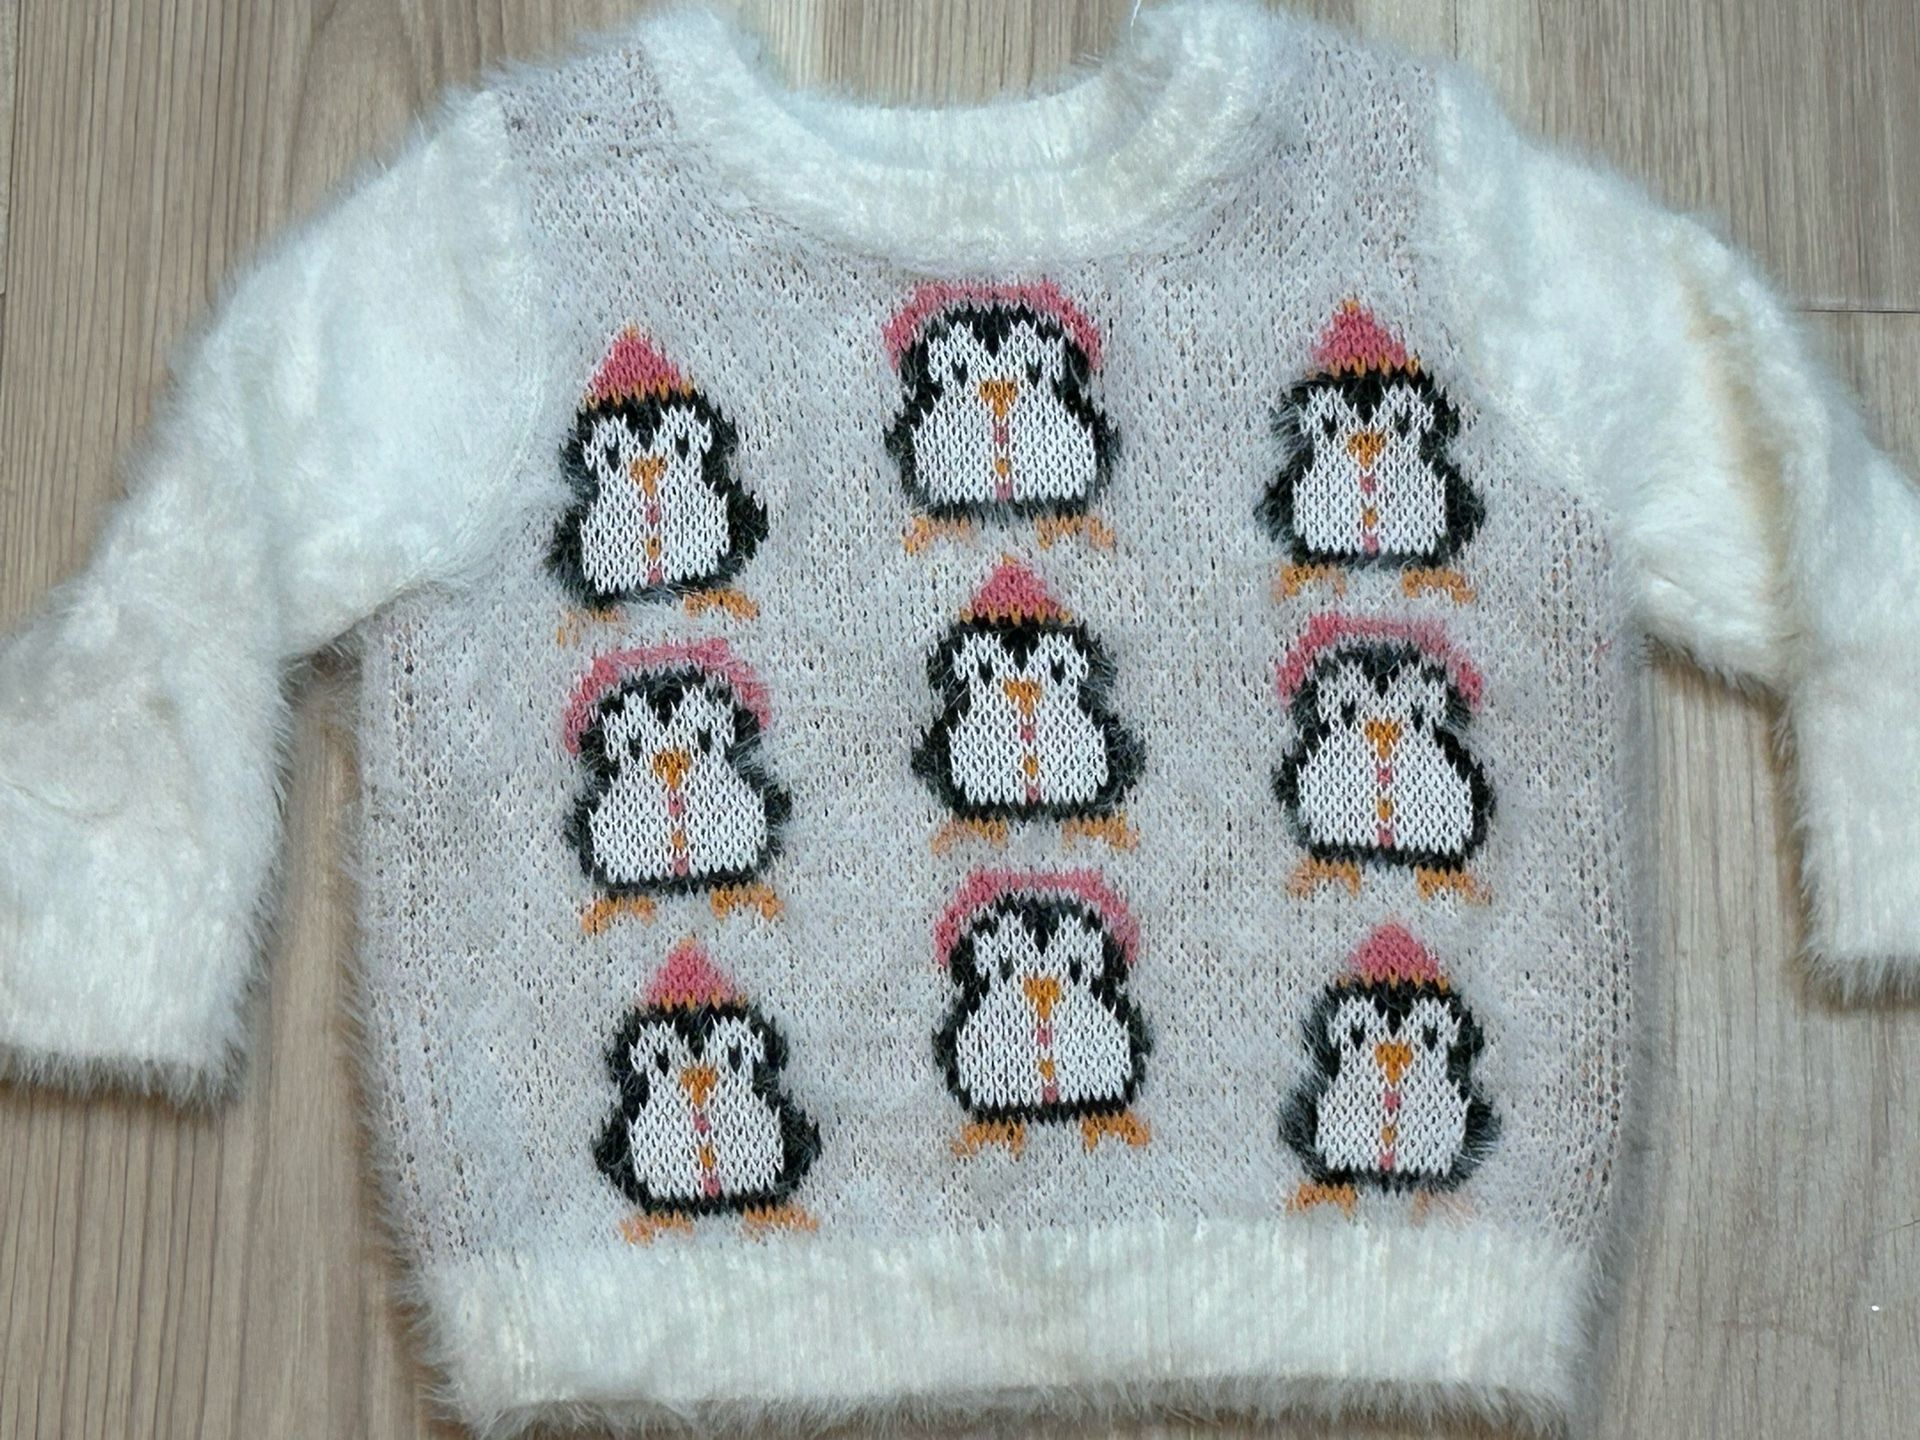 Tucker & Tate Sweater Infant Size 6 Months White Fluffy Penguin Pullover Fuzzy